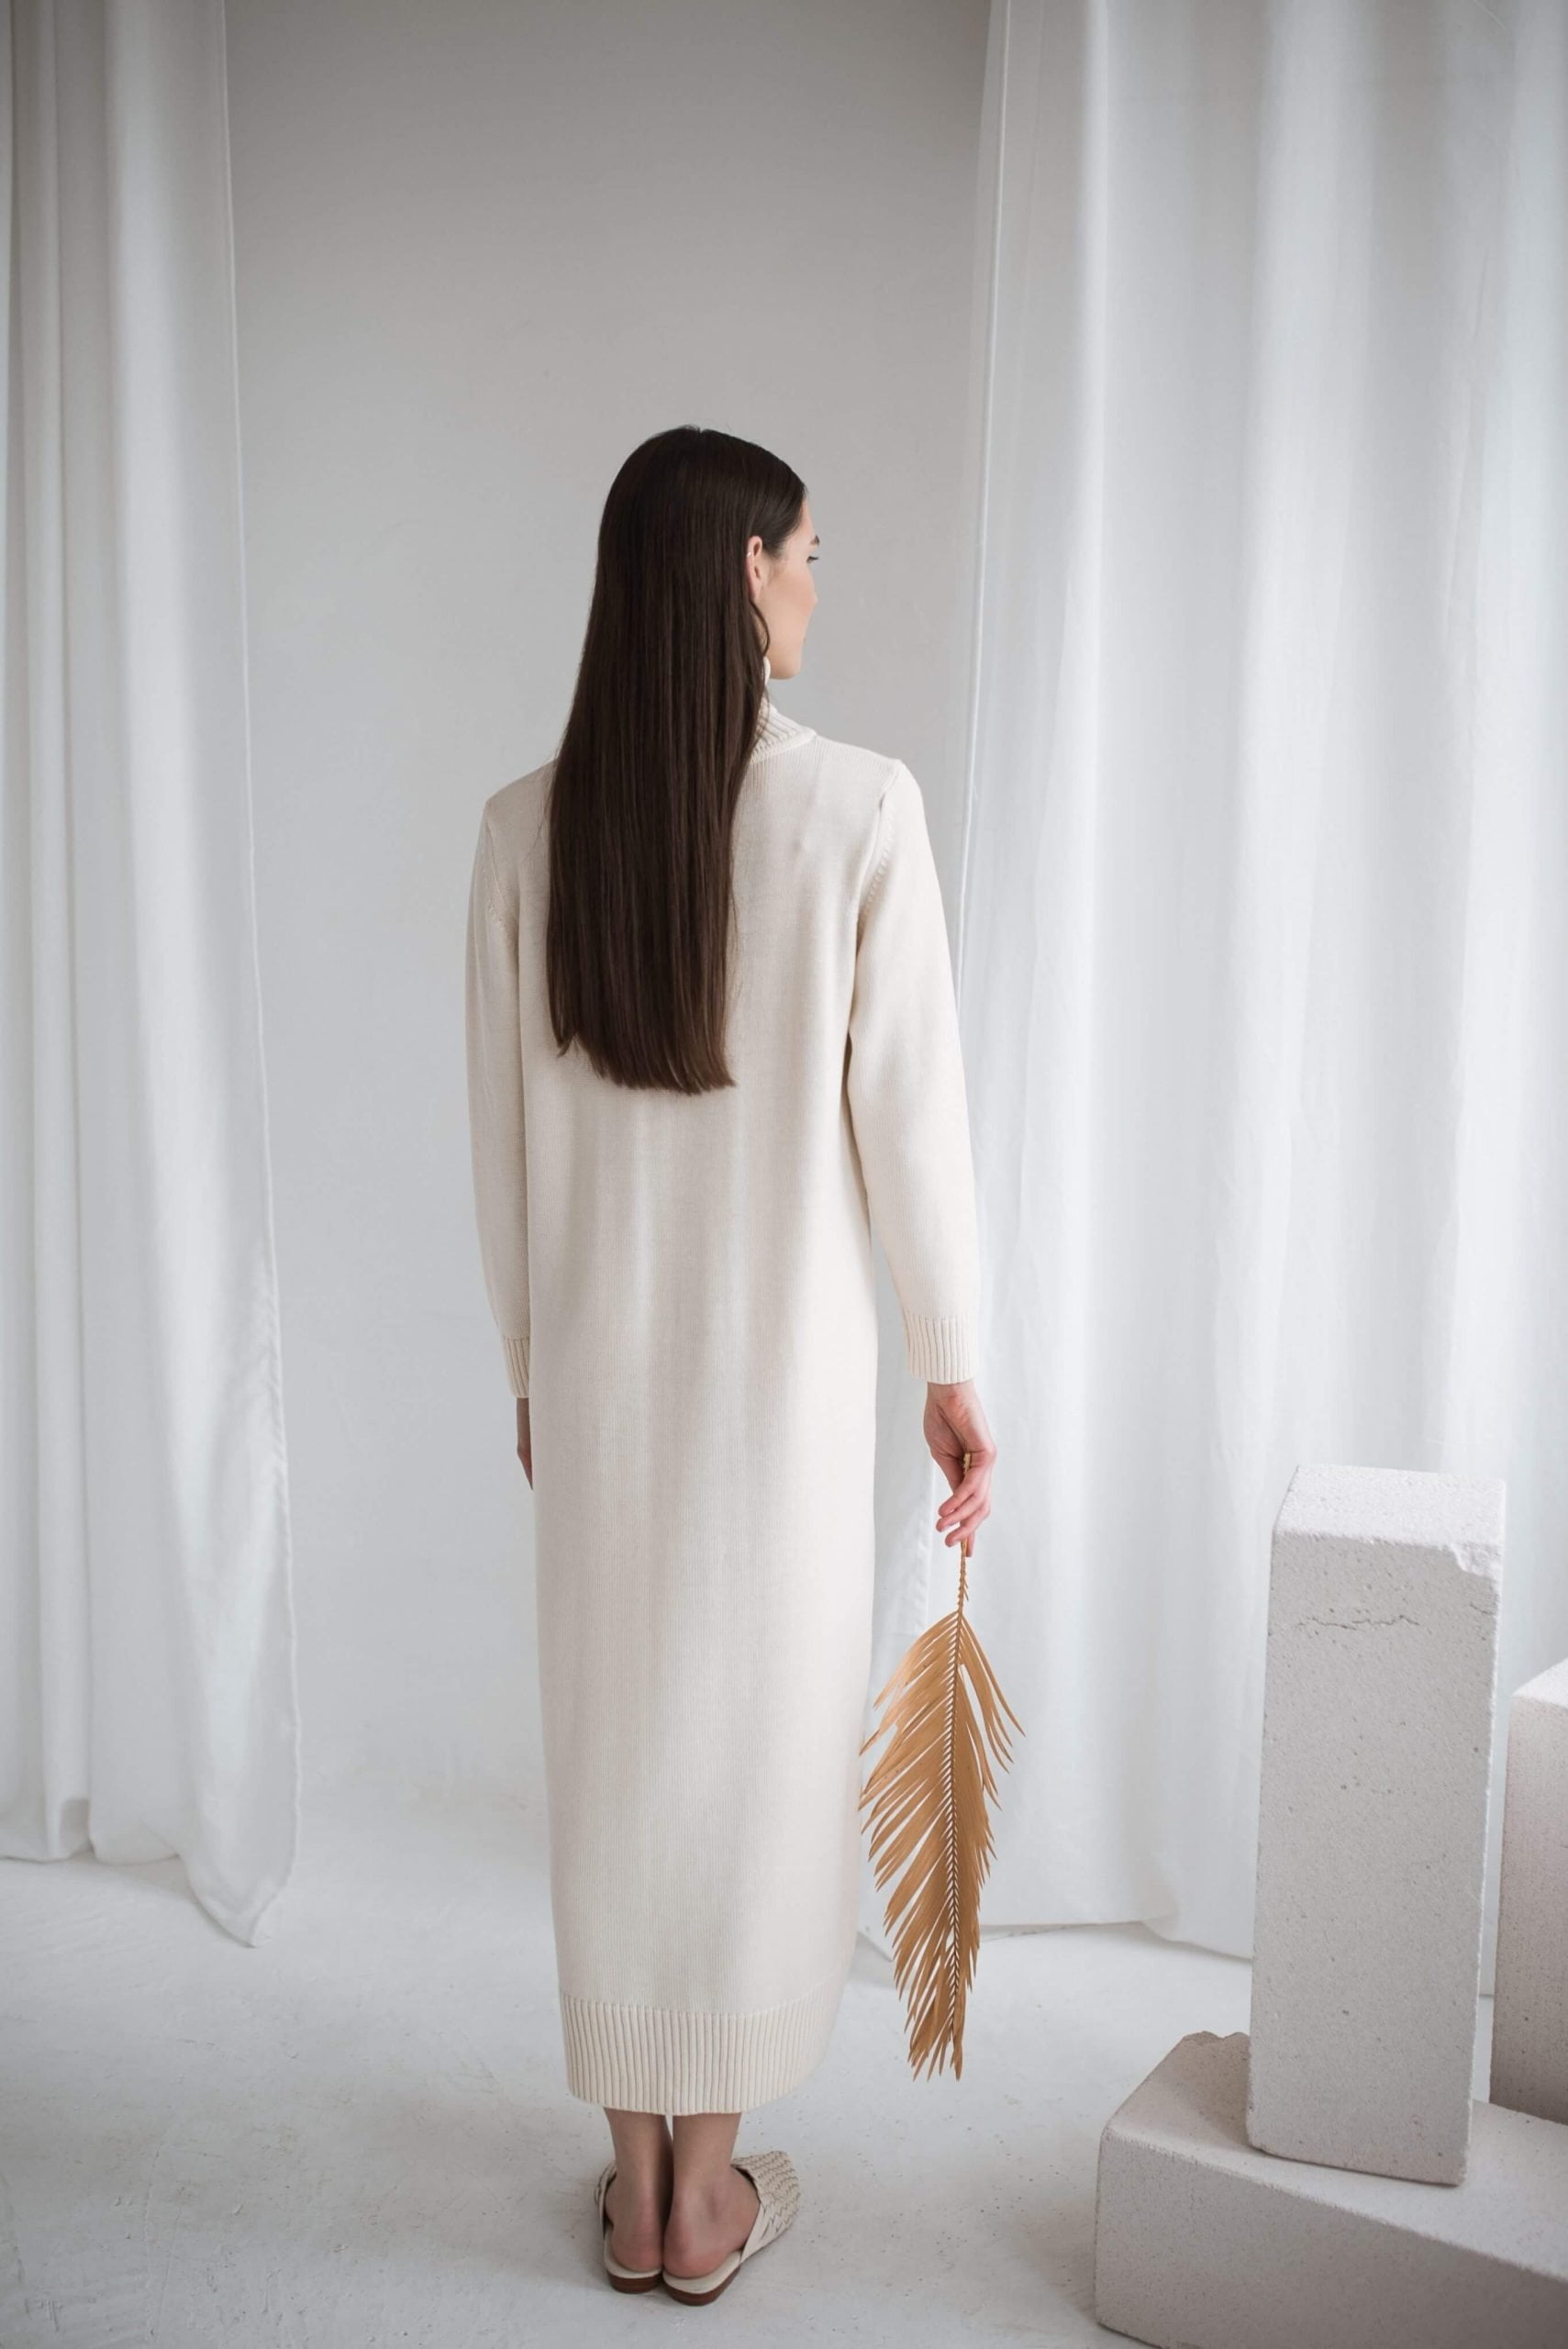 A long natural white merino wool dress with a roll neck and calf-length them